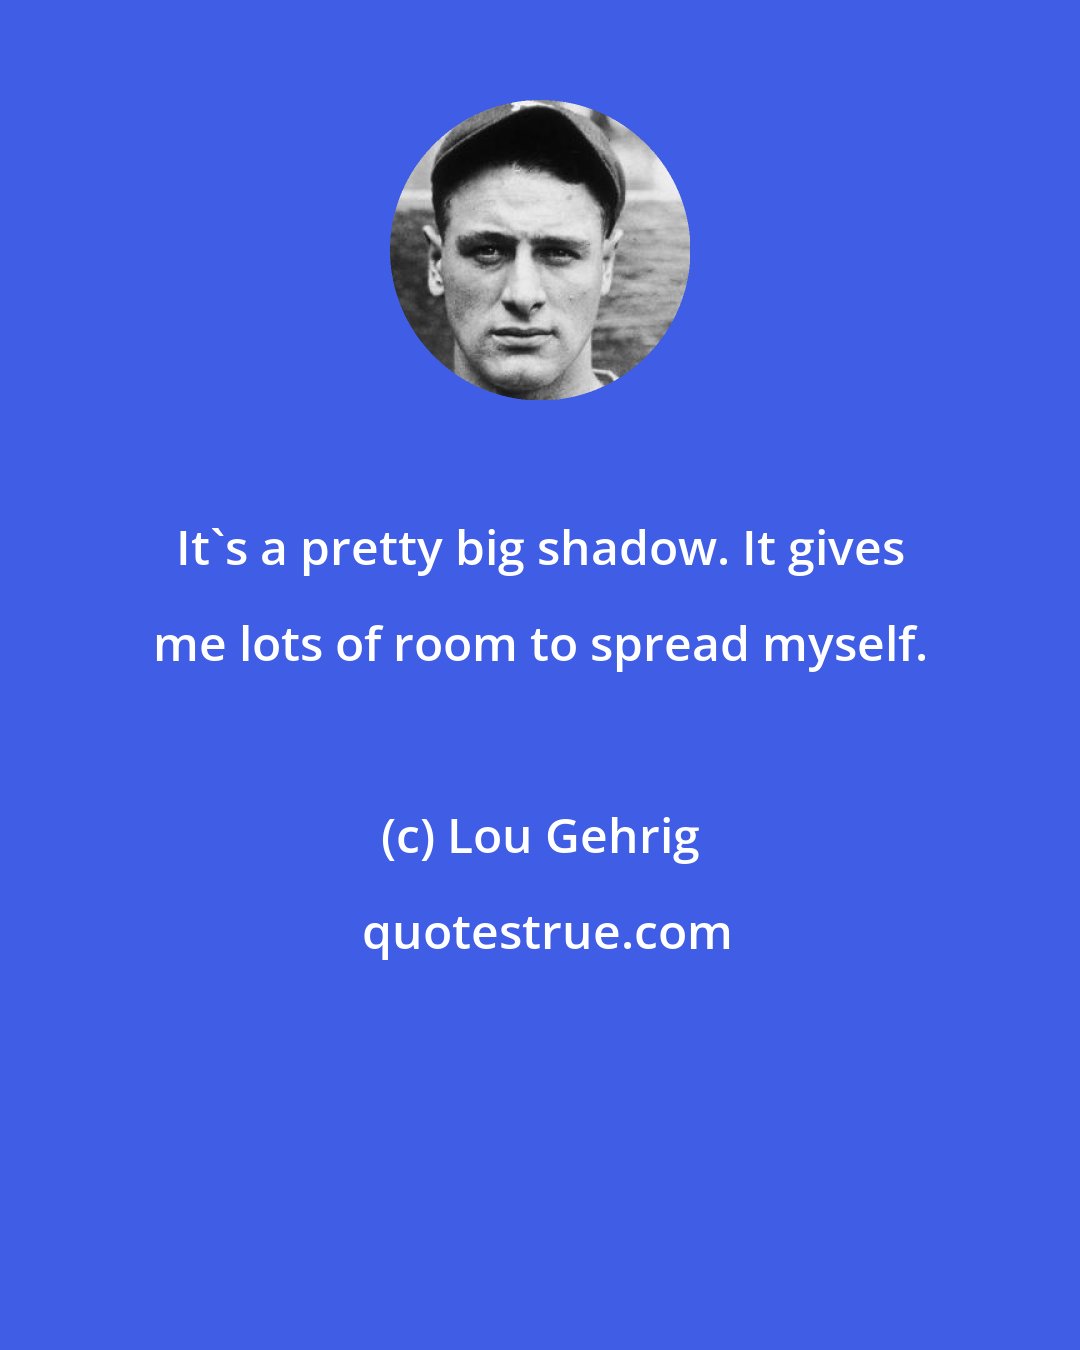 Lou Gehrig: It's a pretty big shadow. It gives me lots of room to spread myself.